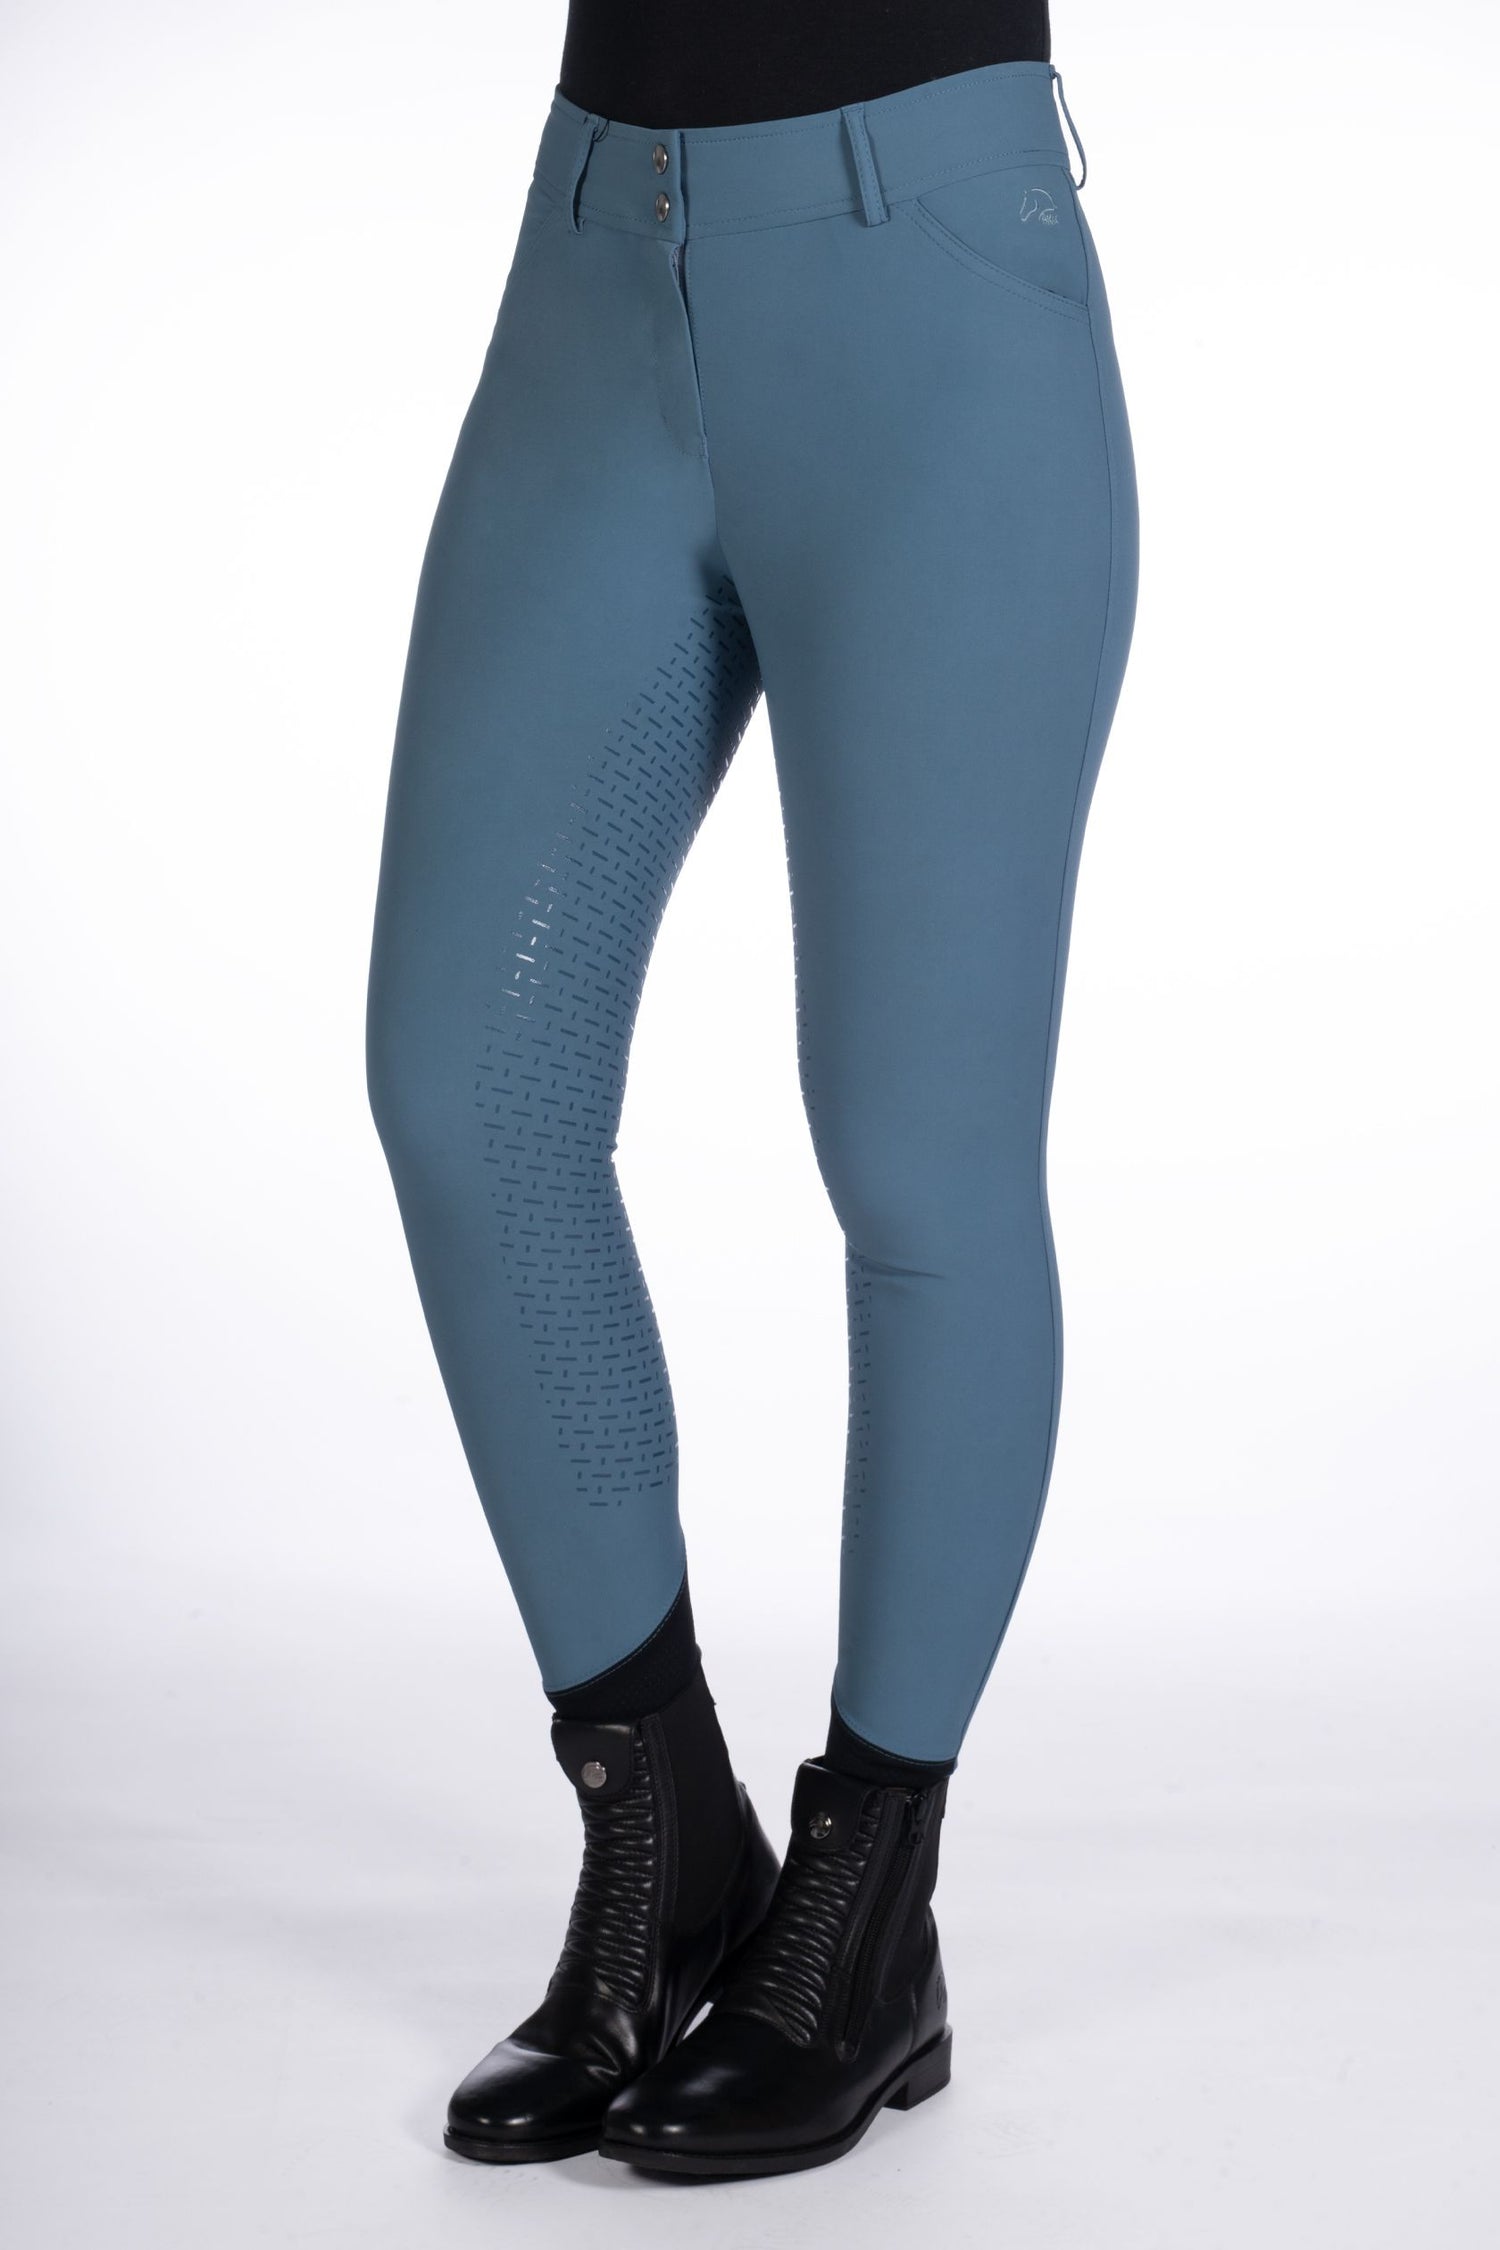 Summer riding breeches with silicone full seat